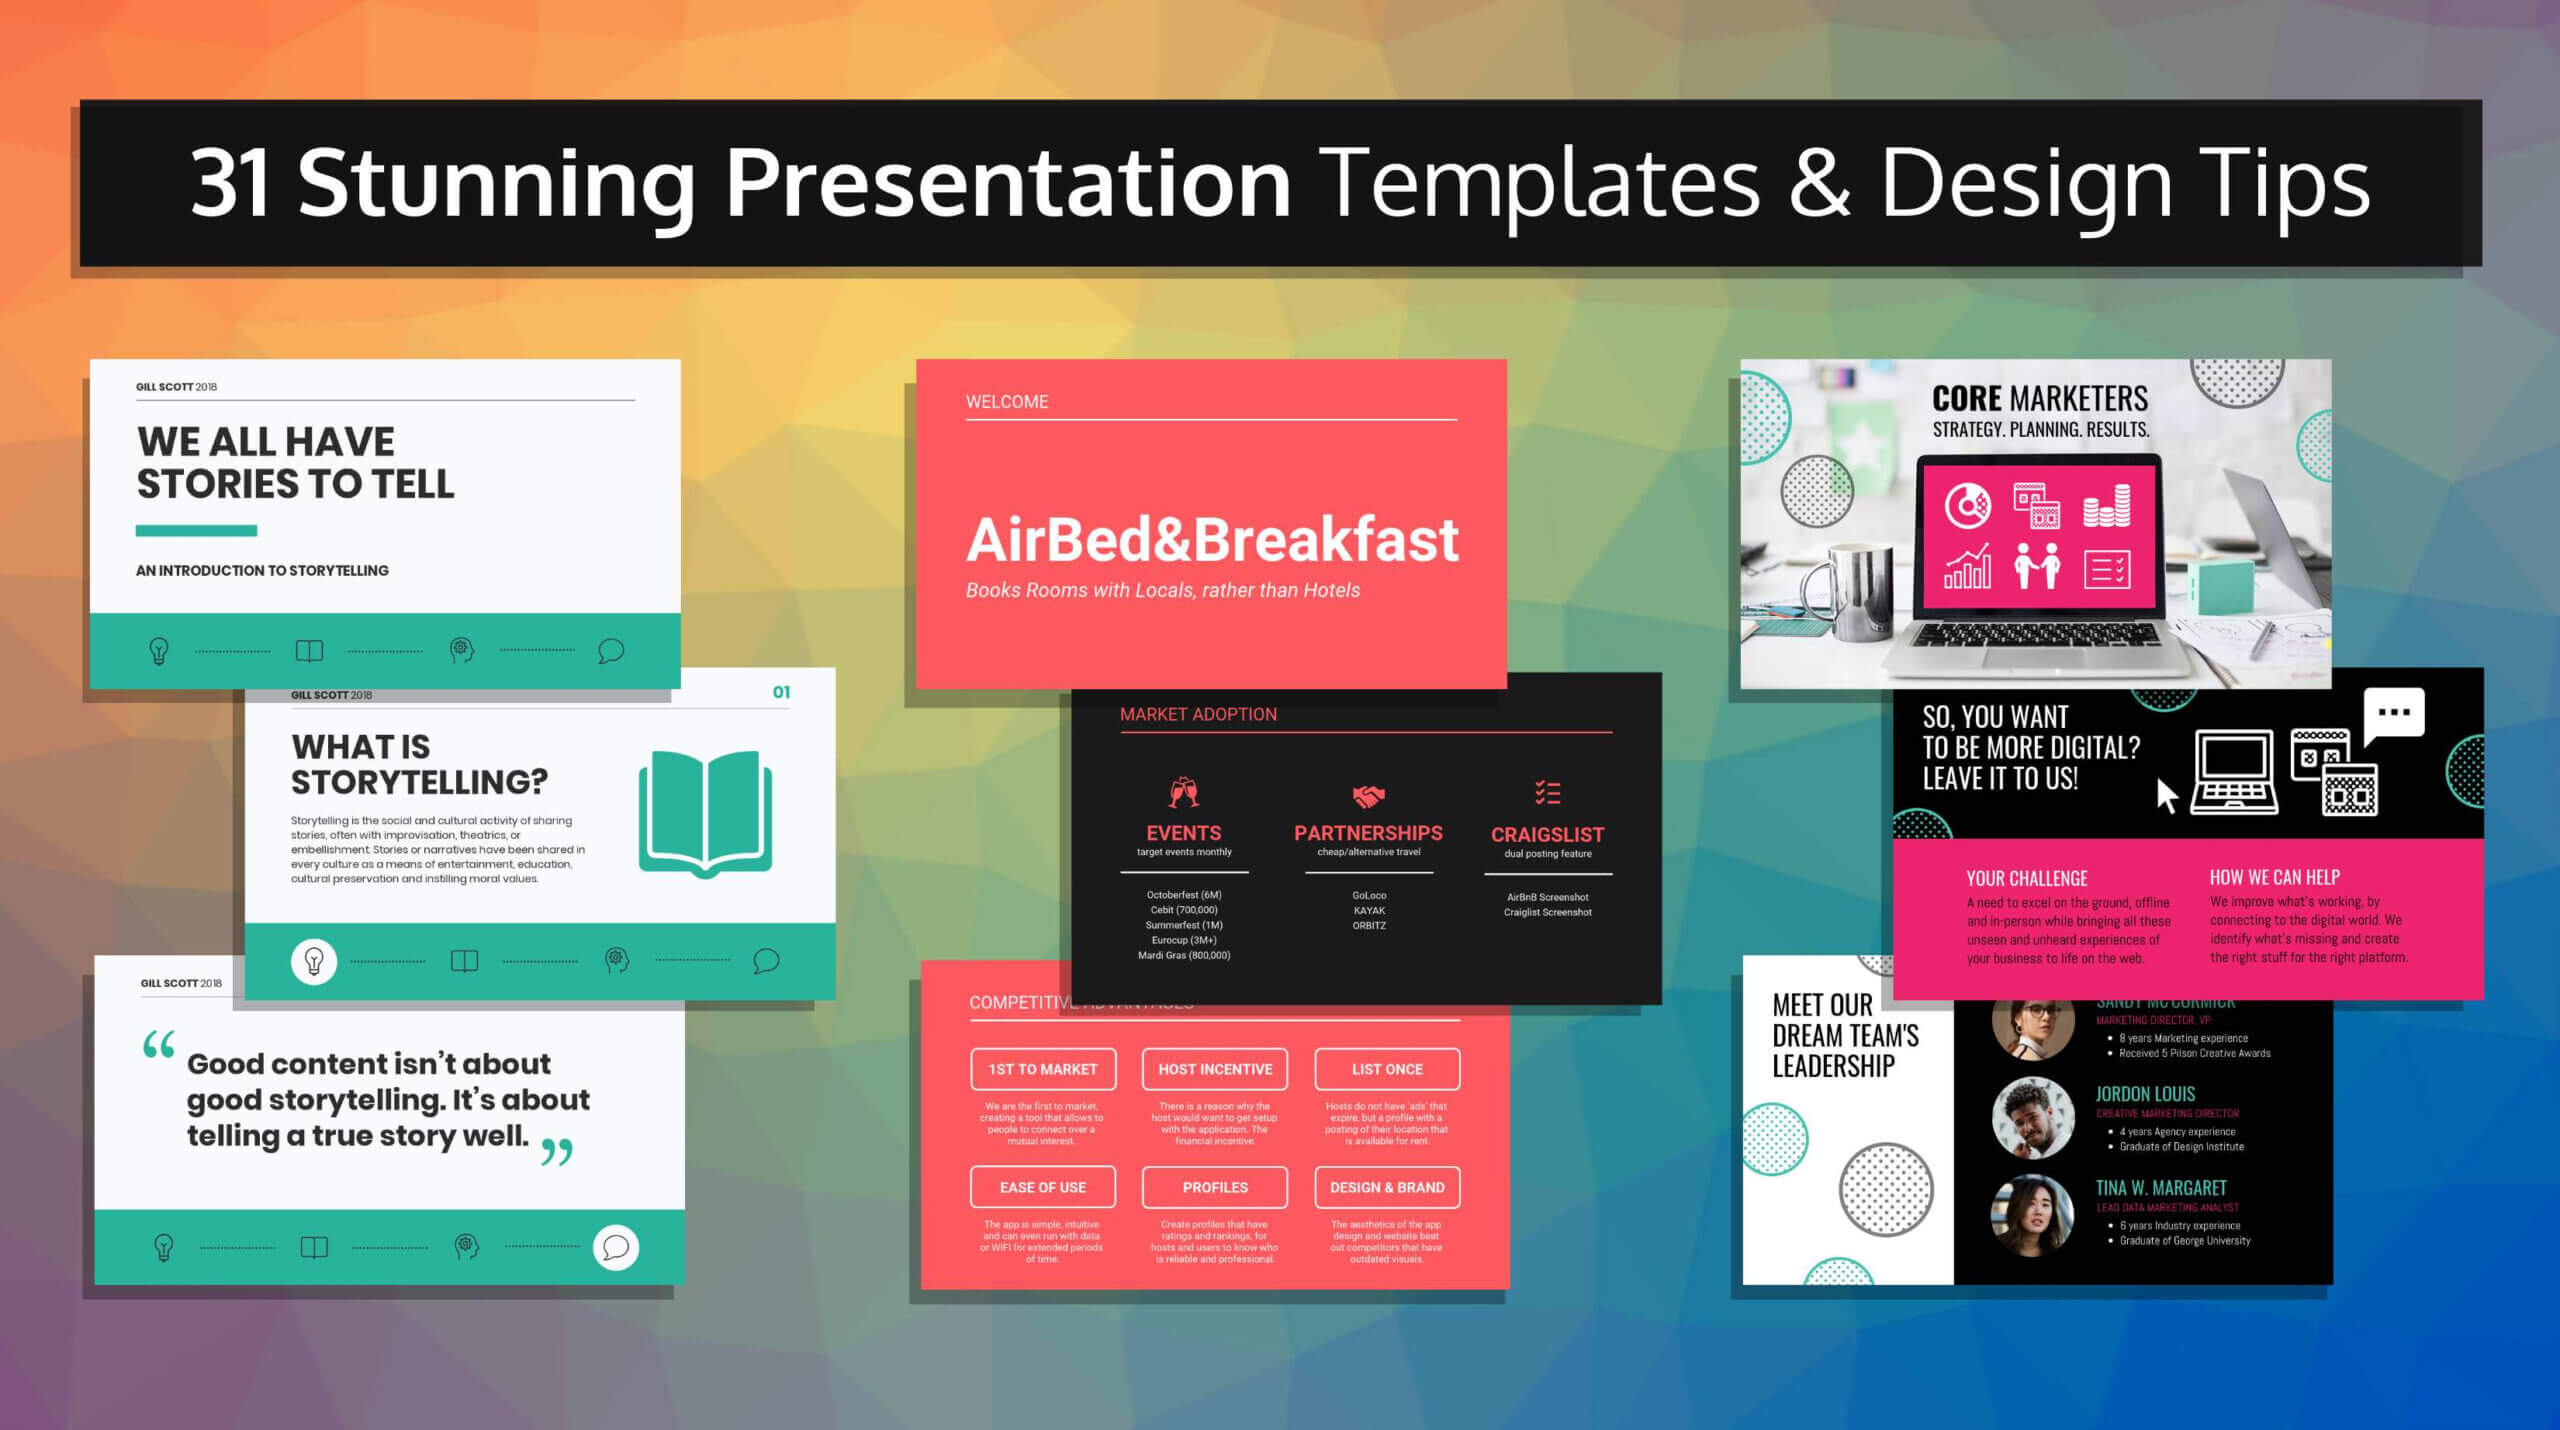 33 Stunning Presentation Templates And Design Tips For Powerpoint Slides Design Templates For Free